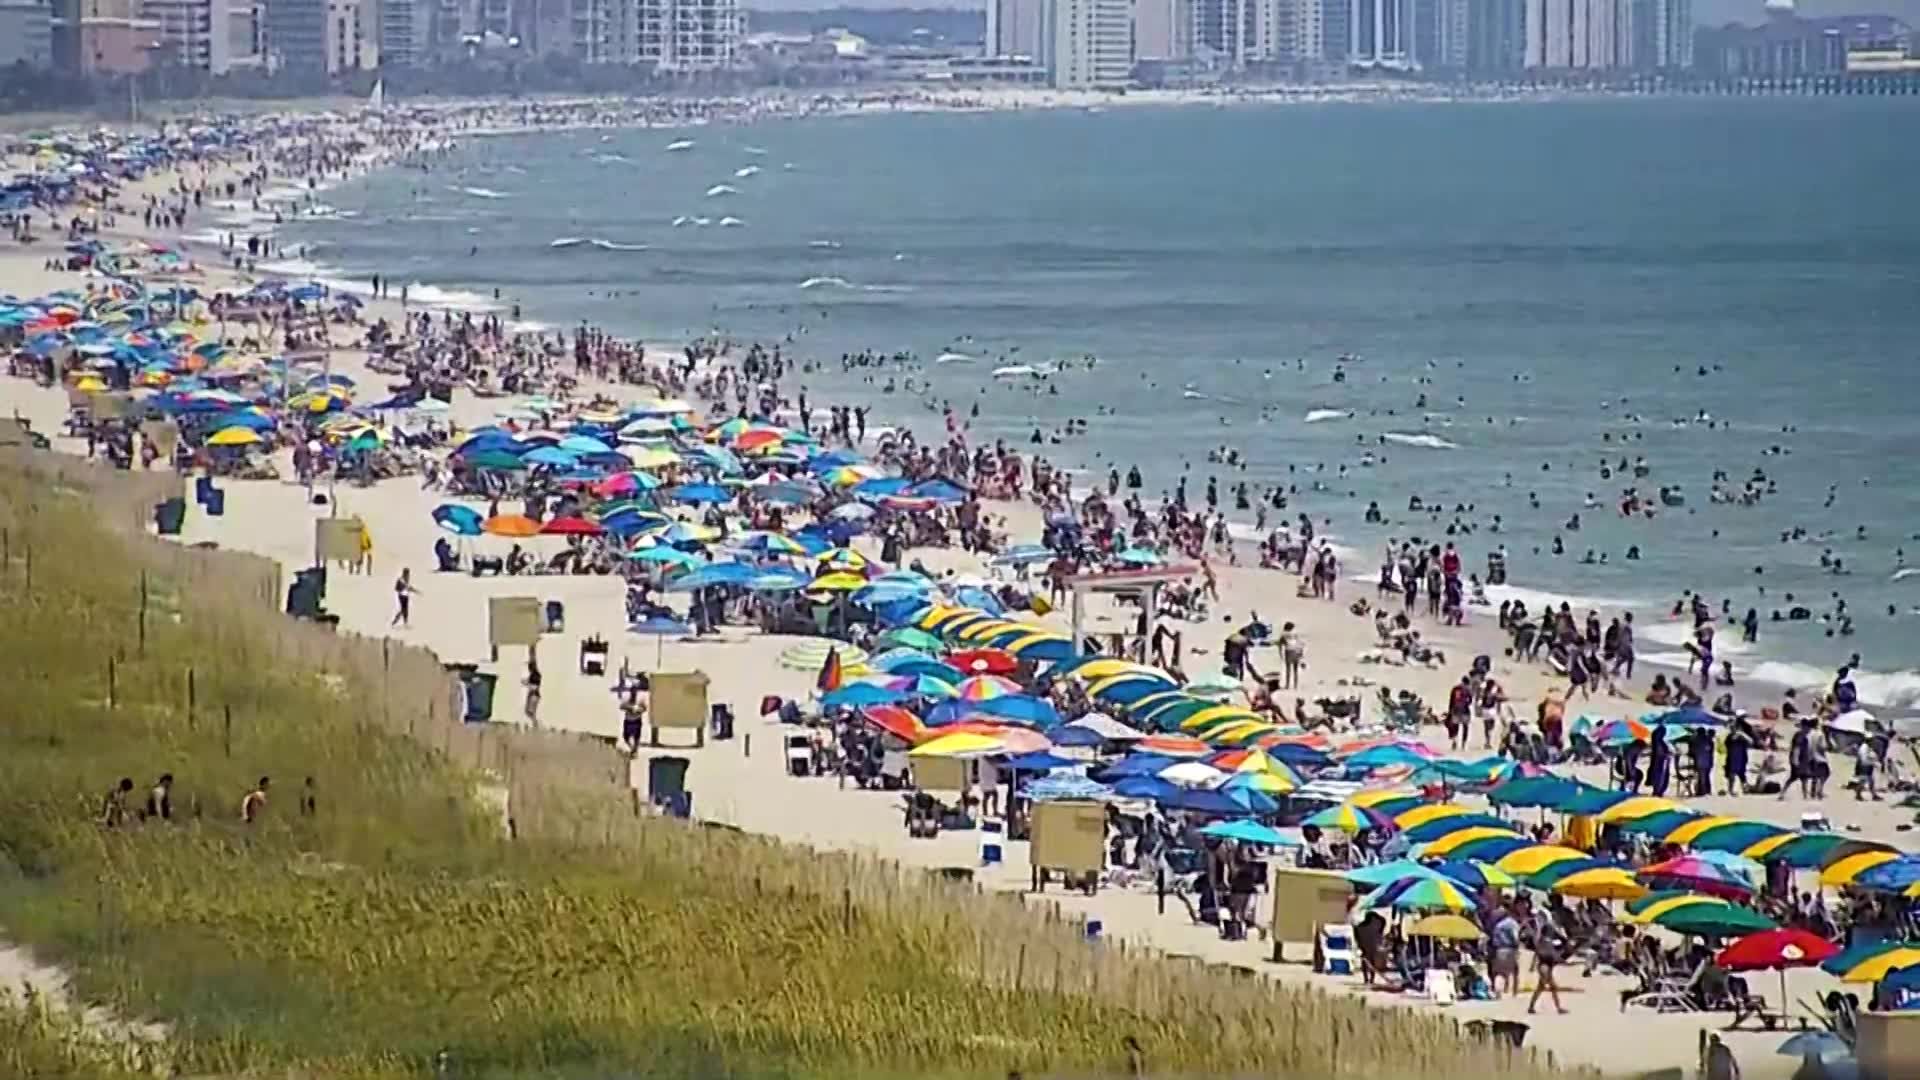 South Carolina: Why is Myrtle Beach water so blue lately?